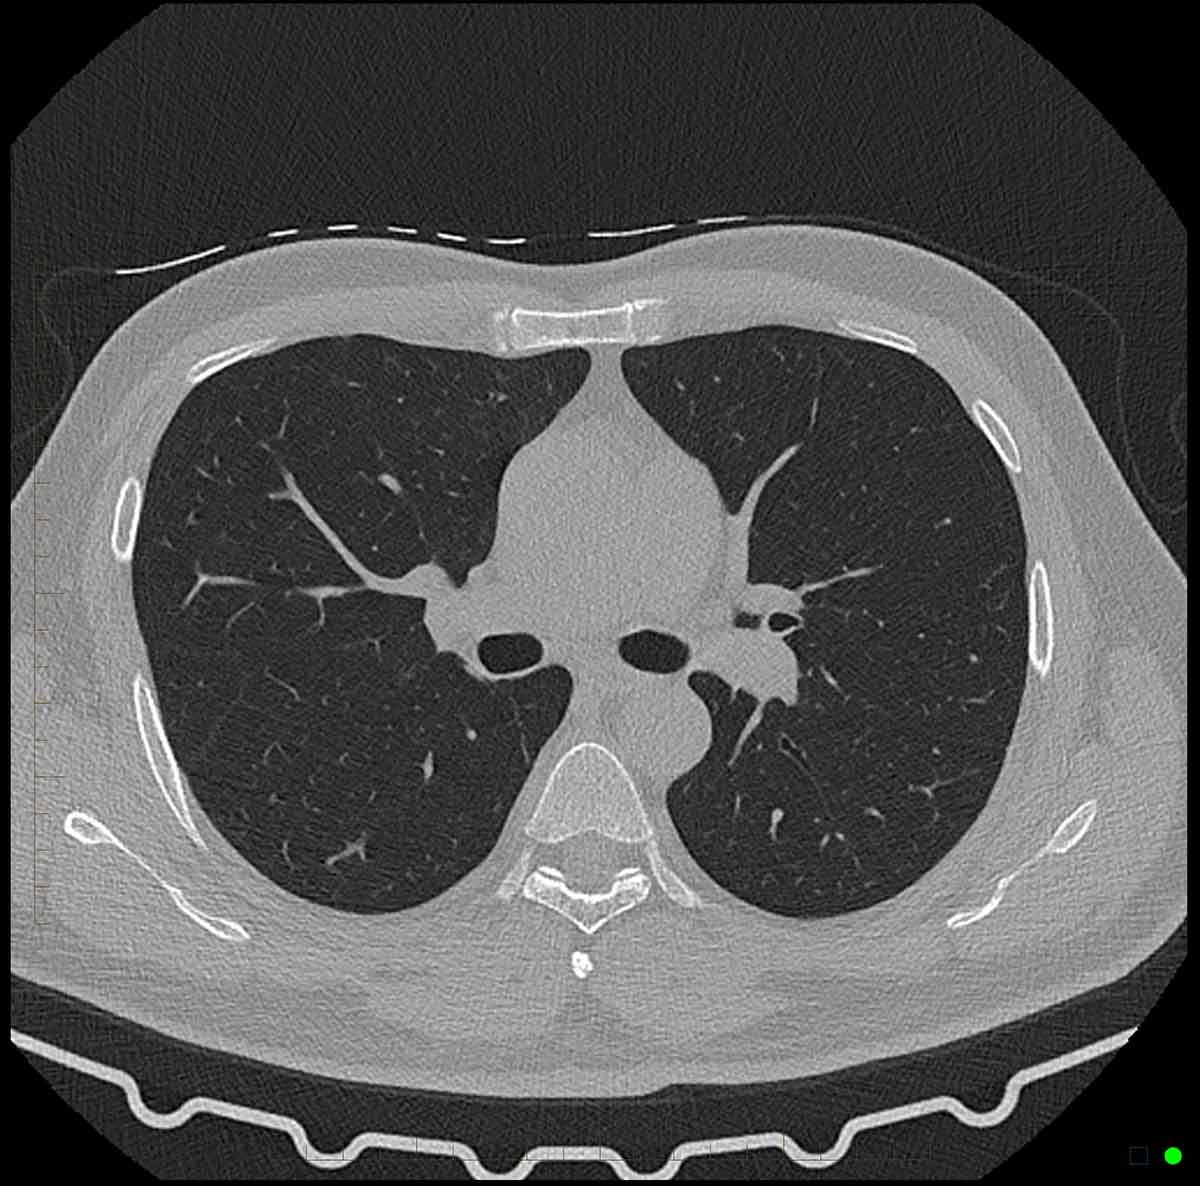 CT chest scan 2